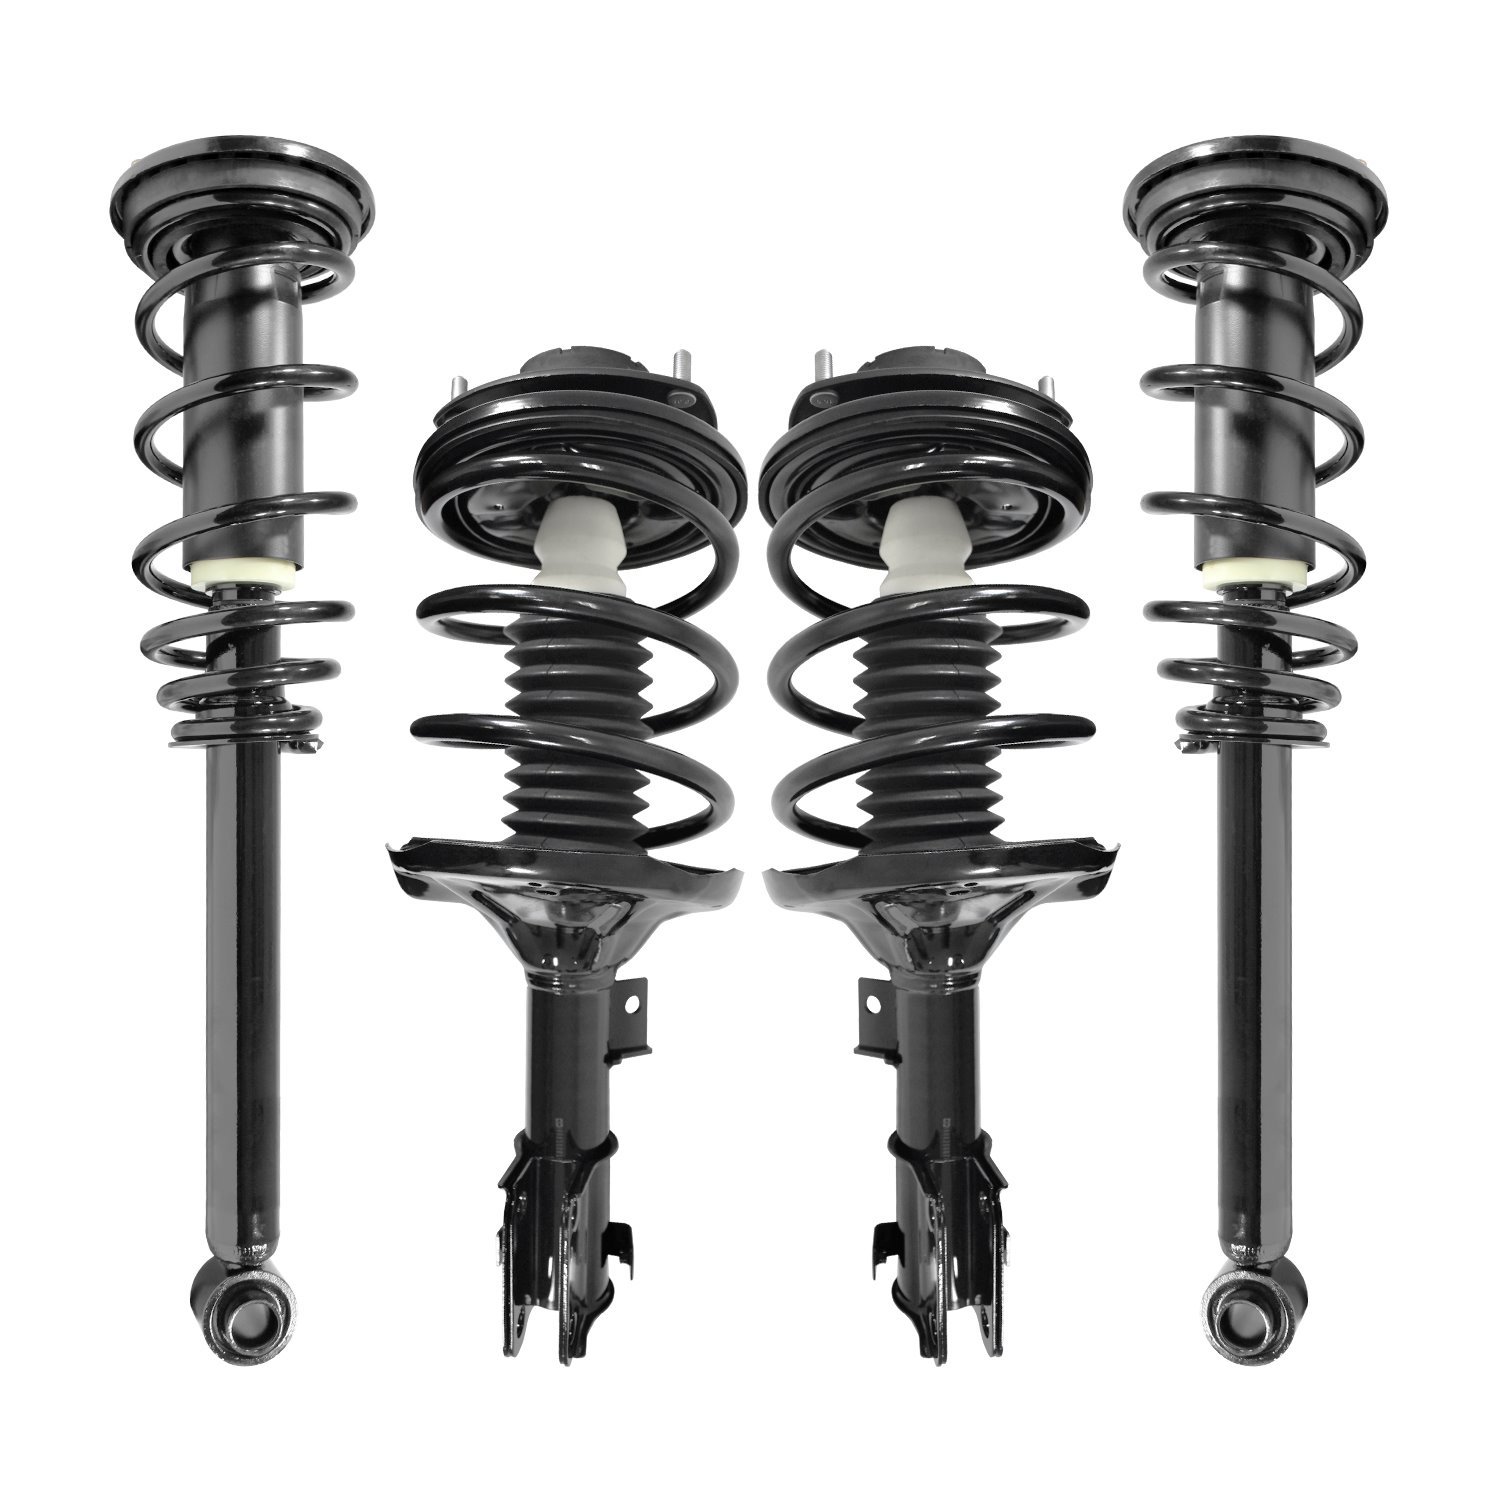 4-11191-15940-001 Front & Rear Suspension Strut & Coil Spring Assembly Kit Fits Select Mitsubishi Eclipse